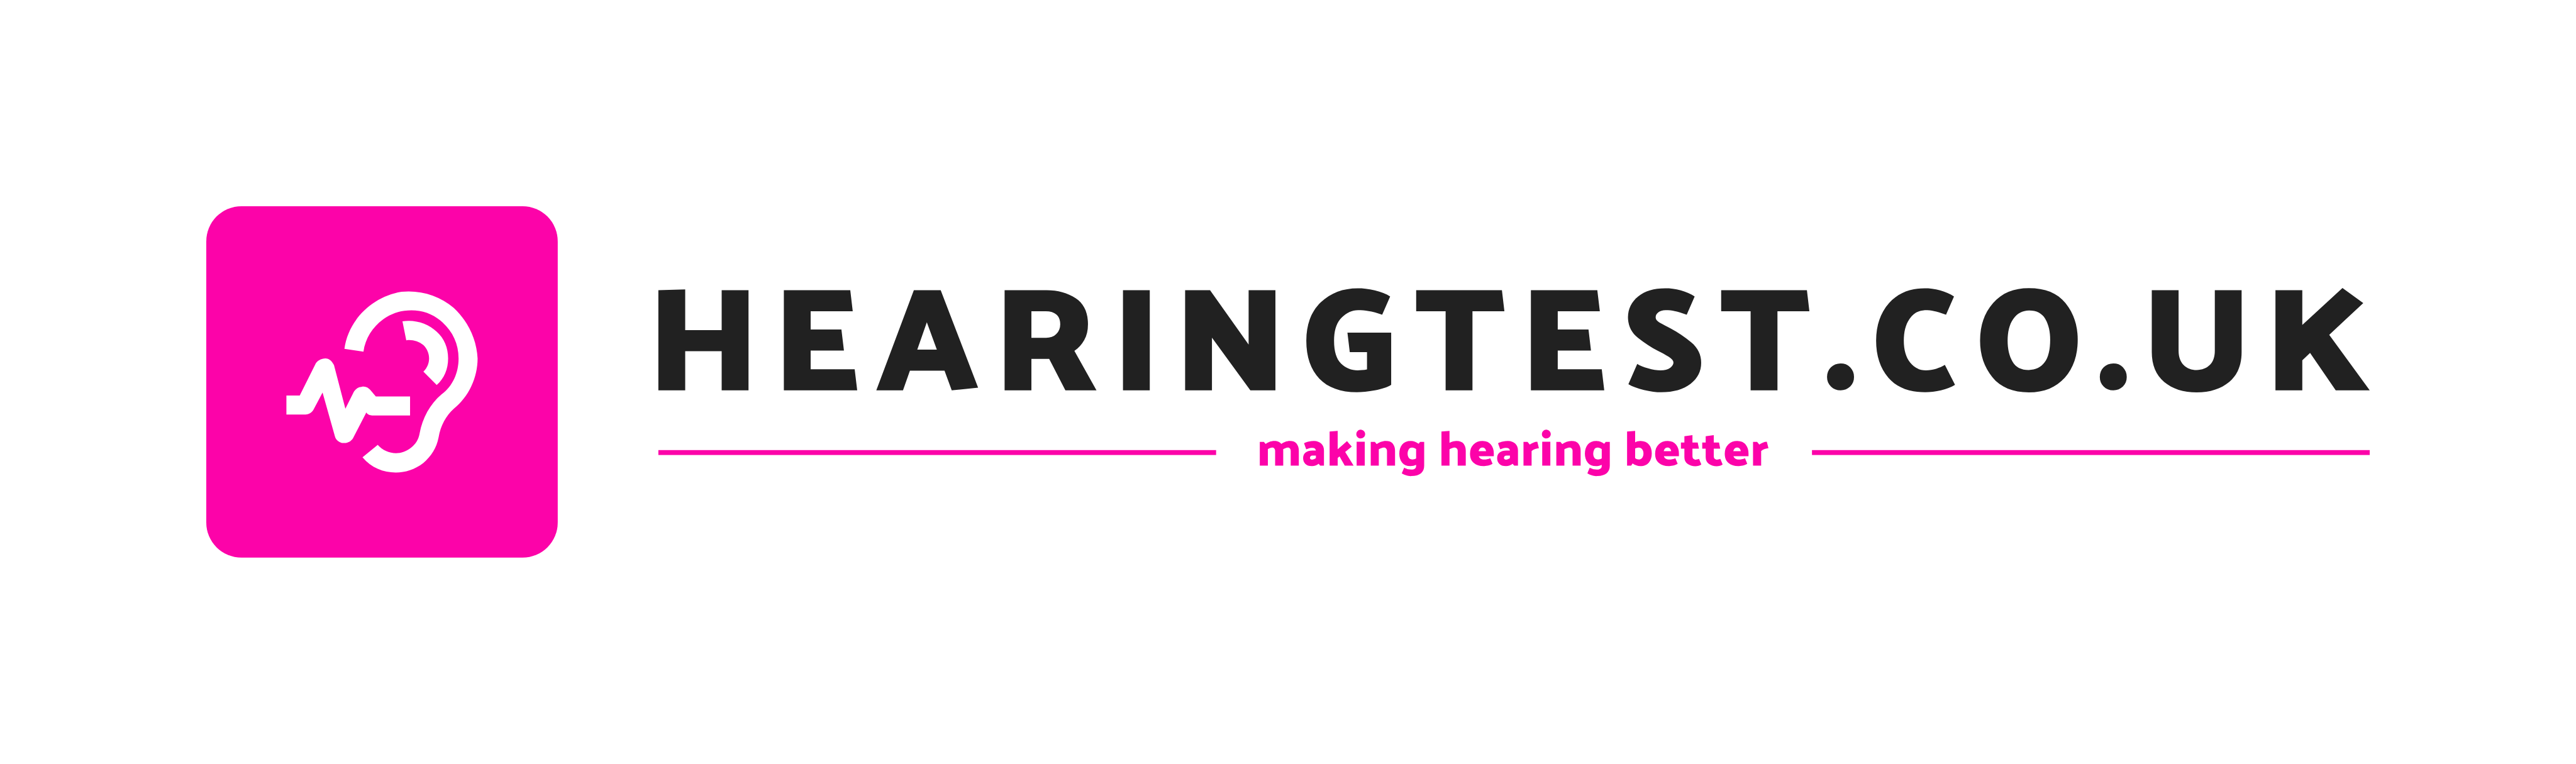 Free Hearing Test for Adults in Scunthorpe | Hearingtest.co.uk